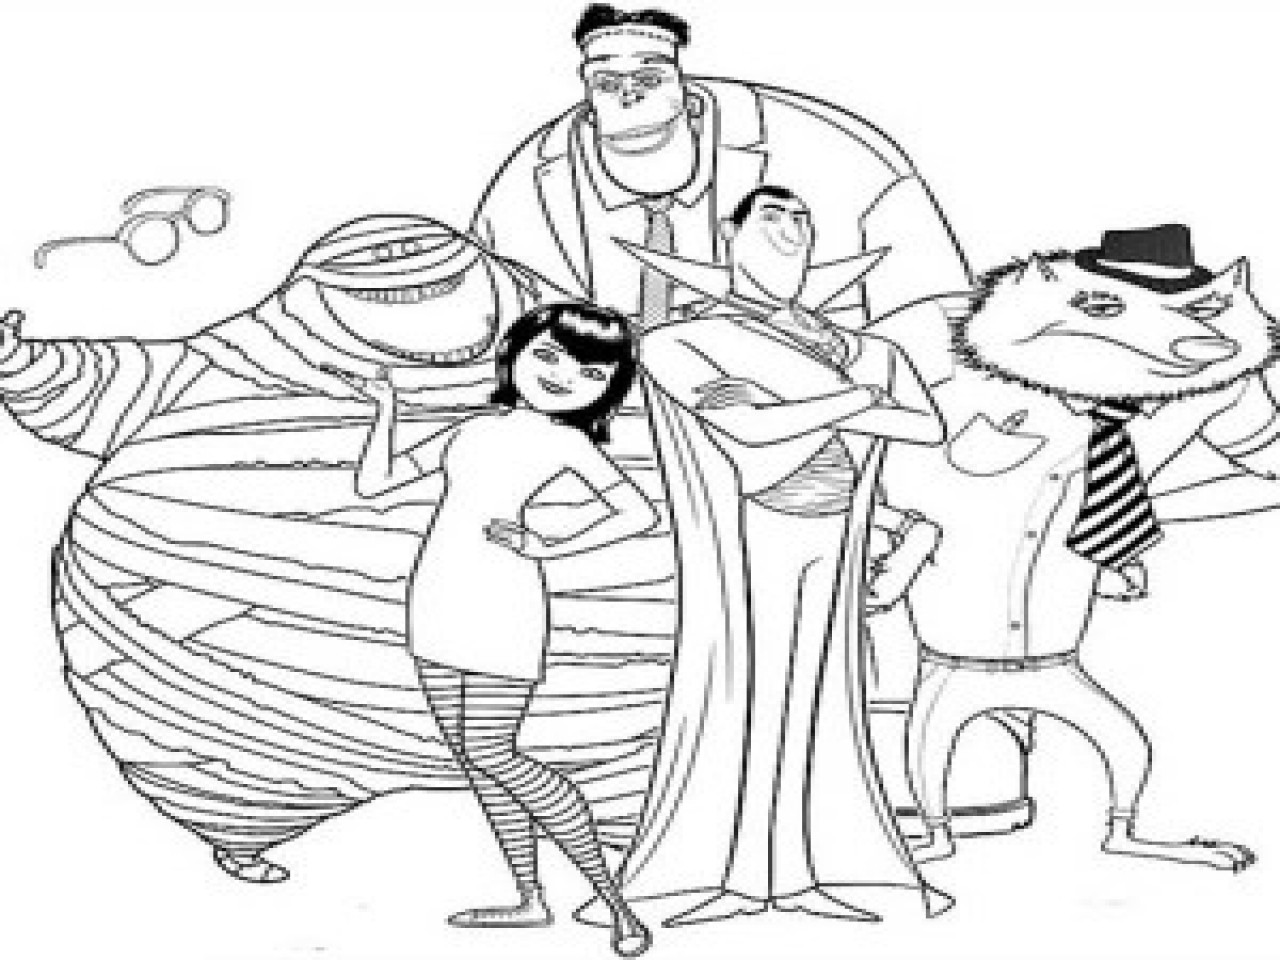 Hotel Transylvania 3 Coloring Pages
 Hotel transylvania coloring pages